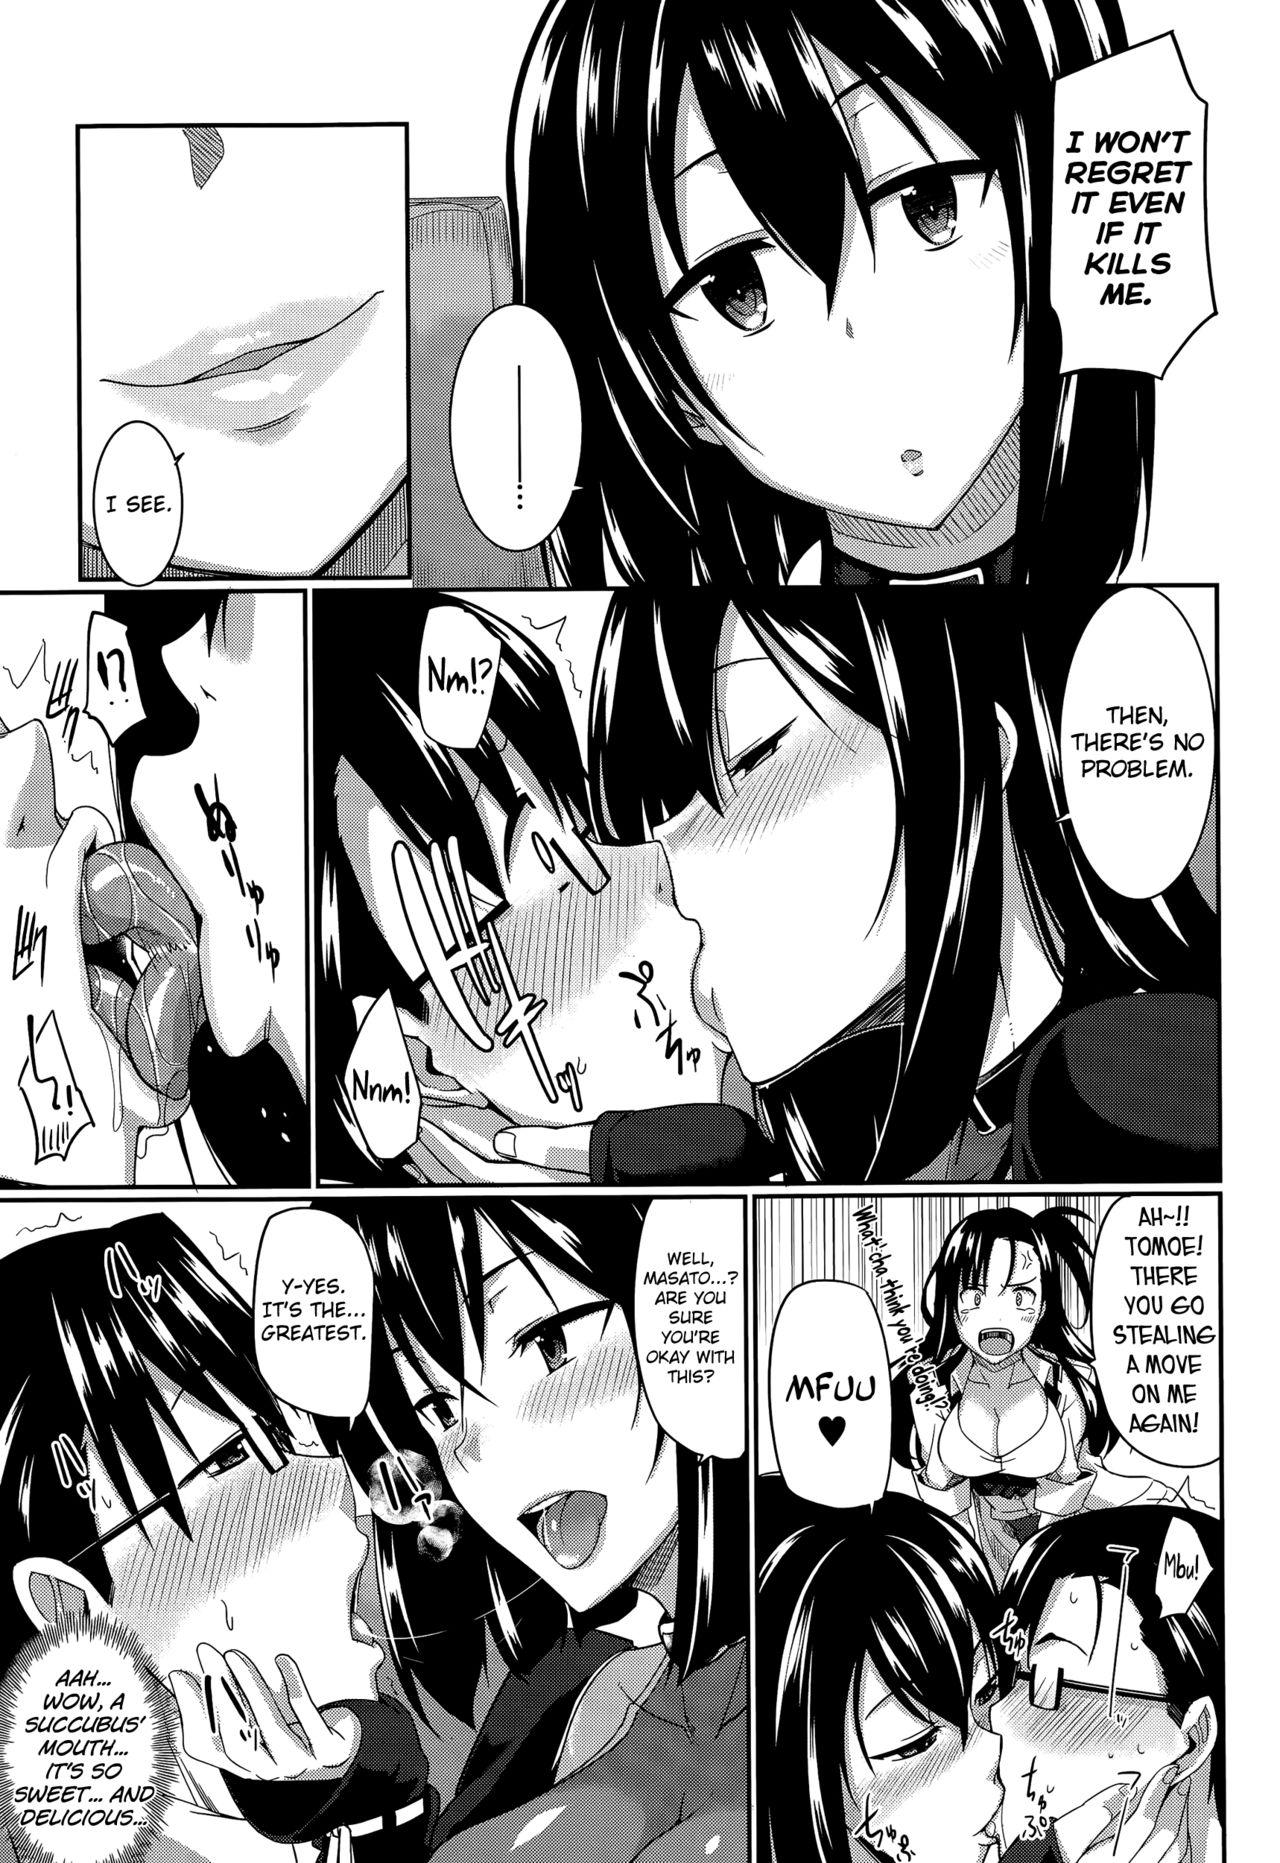 Leather Inma no Mikata! | Succubi's Supporter! Monster Dick - Page 11